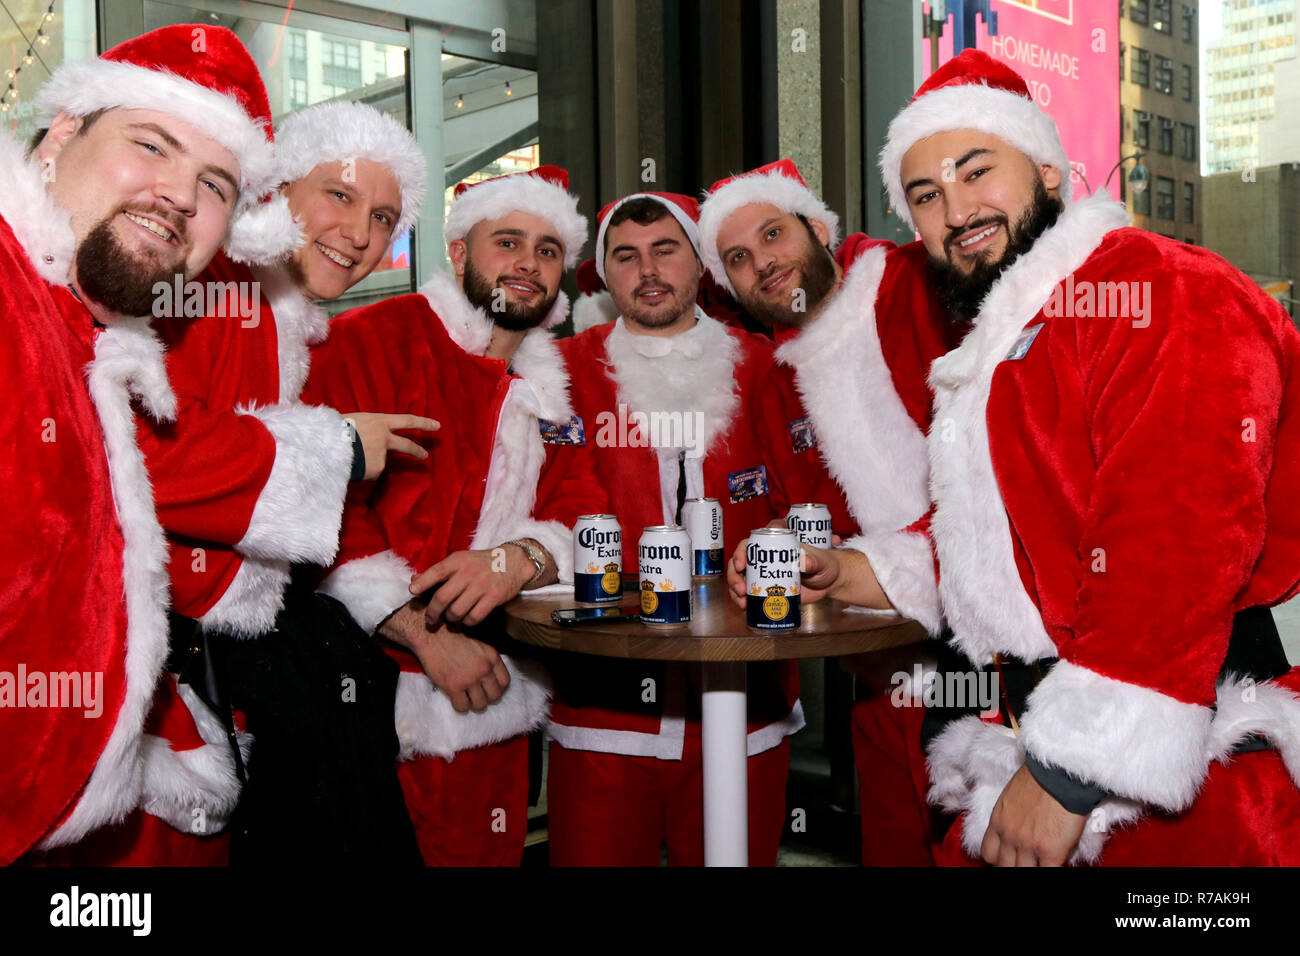 New York, New York, USA. 8th Dec, 2018. Santa Con, the city-wide annual bar crawl got off to an early 10:00 am local-time start in mid-town Manhattan. After a group photo, revelers headed to bars, pubs, strip clubs, karaoke spots and raves who are participating in the seasonally Yuletide bacchanal. Credit: G. Ronald Lopez/ZUMA Wire/Alamy Live News Stock Photo